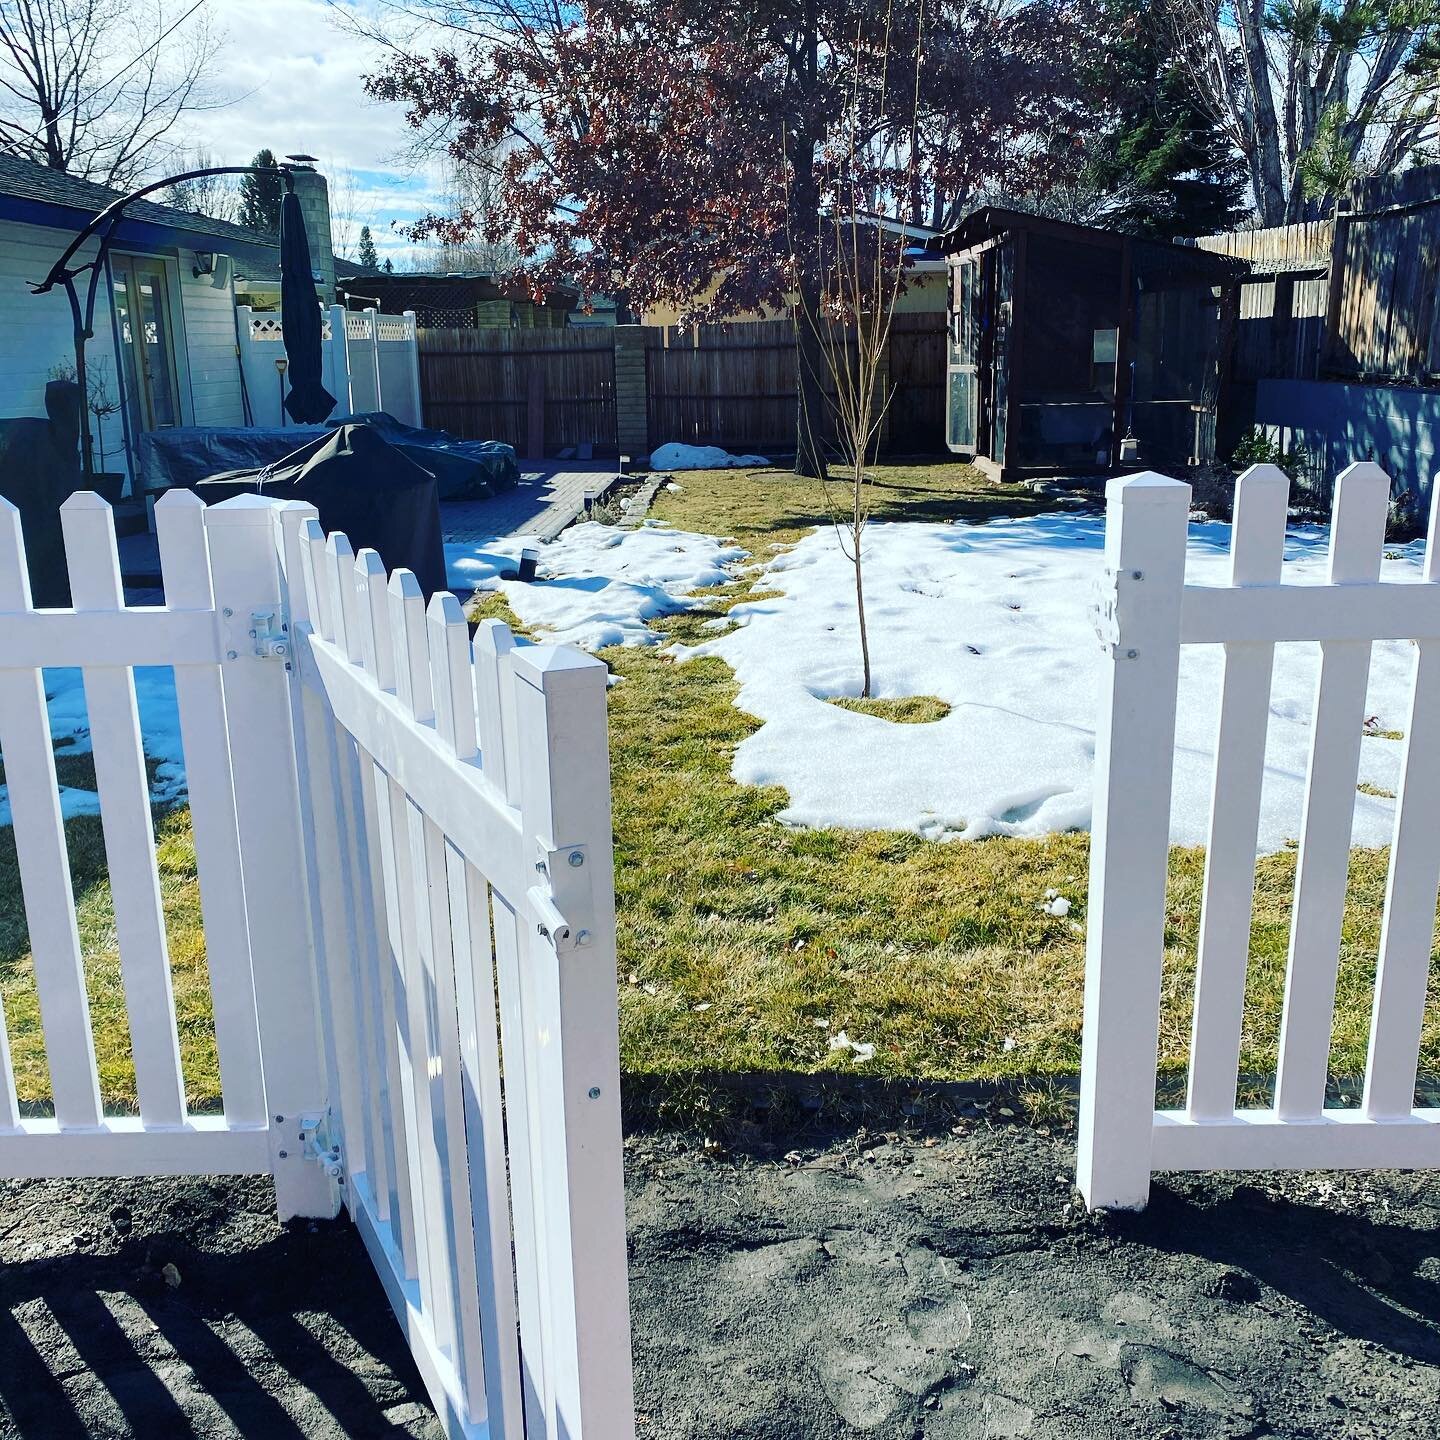 Low maintenance ✔️ Decorative ✔️

Renovations to your property, whenever you are improving the house, is going help you sell your home faster. Look into more of our vinyl fence capabilities by visiting our website! 🔗 in bio 👀